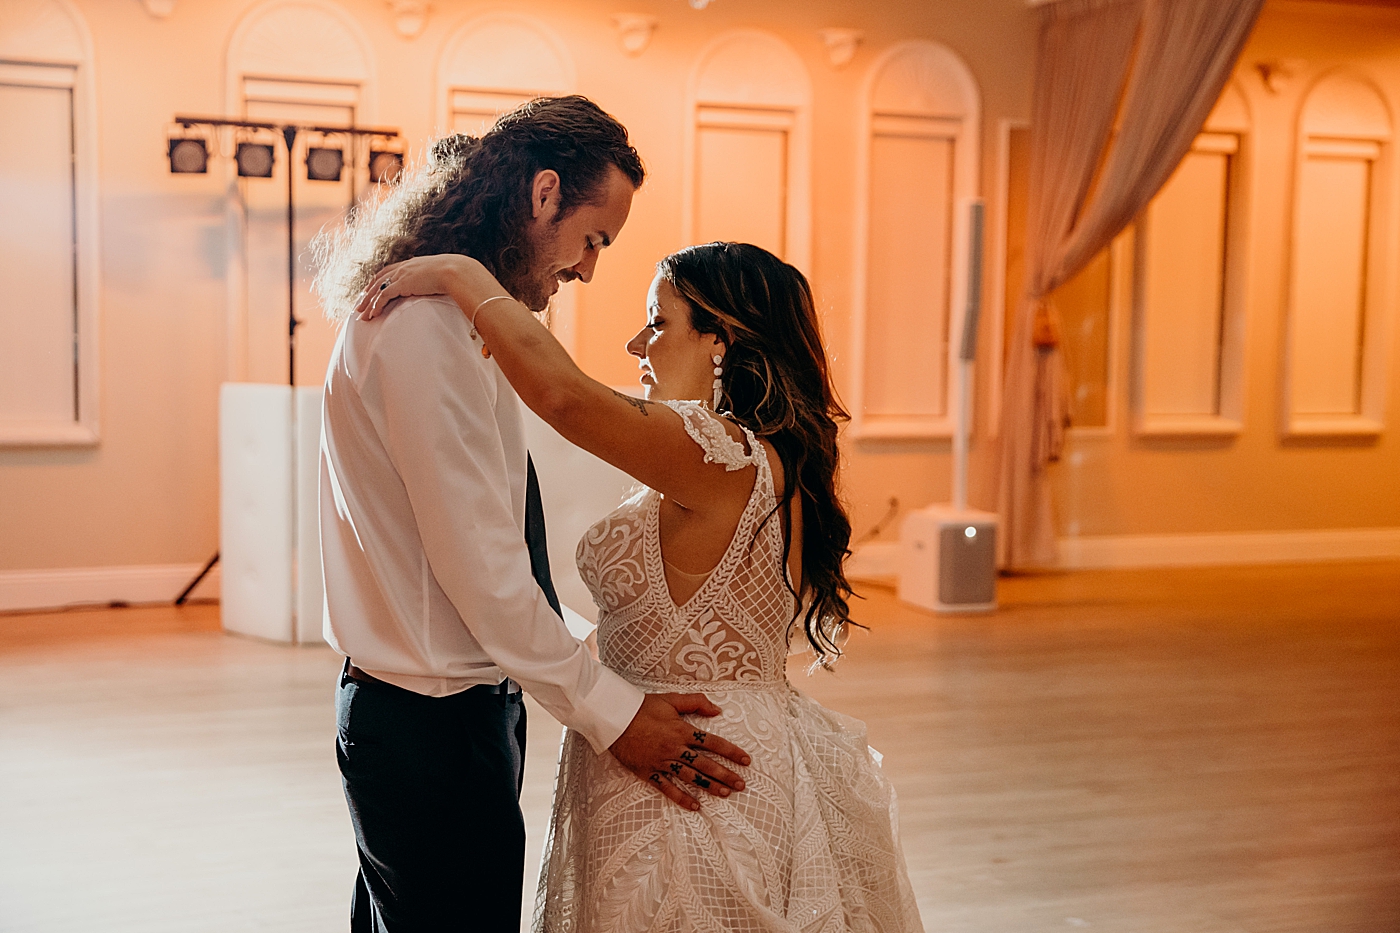 Bride and Groom dancing together Benvenuto Restaurant Wedding Photography captured by South Florida Wedding Photographer Maggie Alvarez Photography